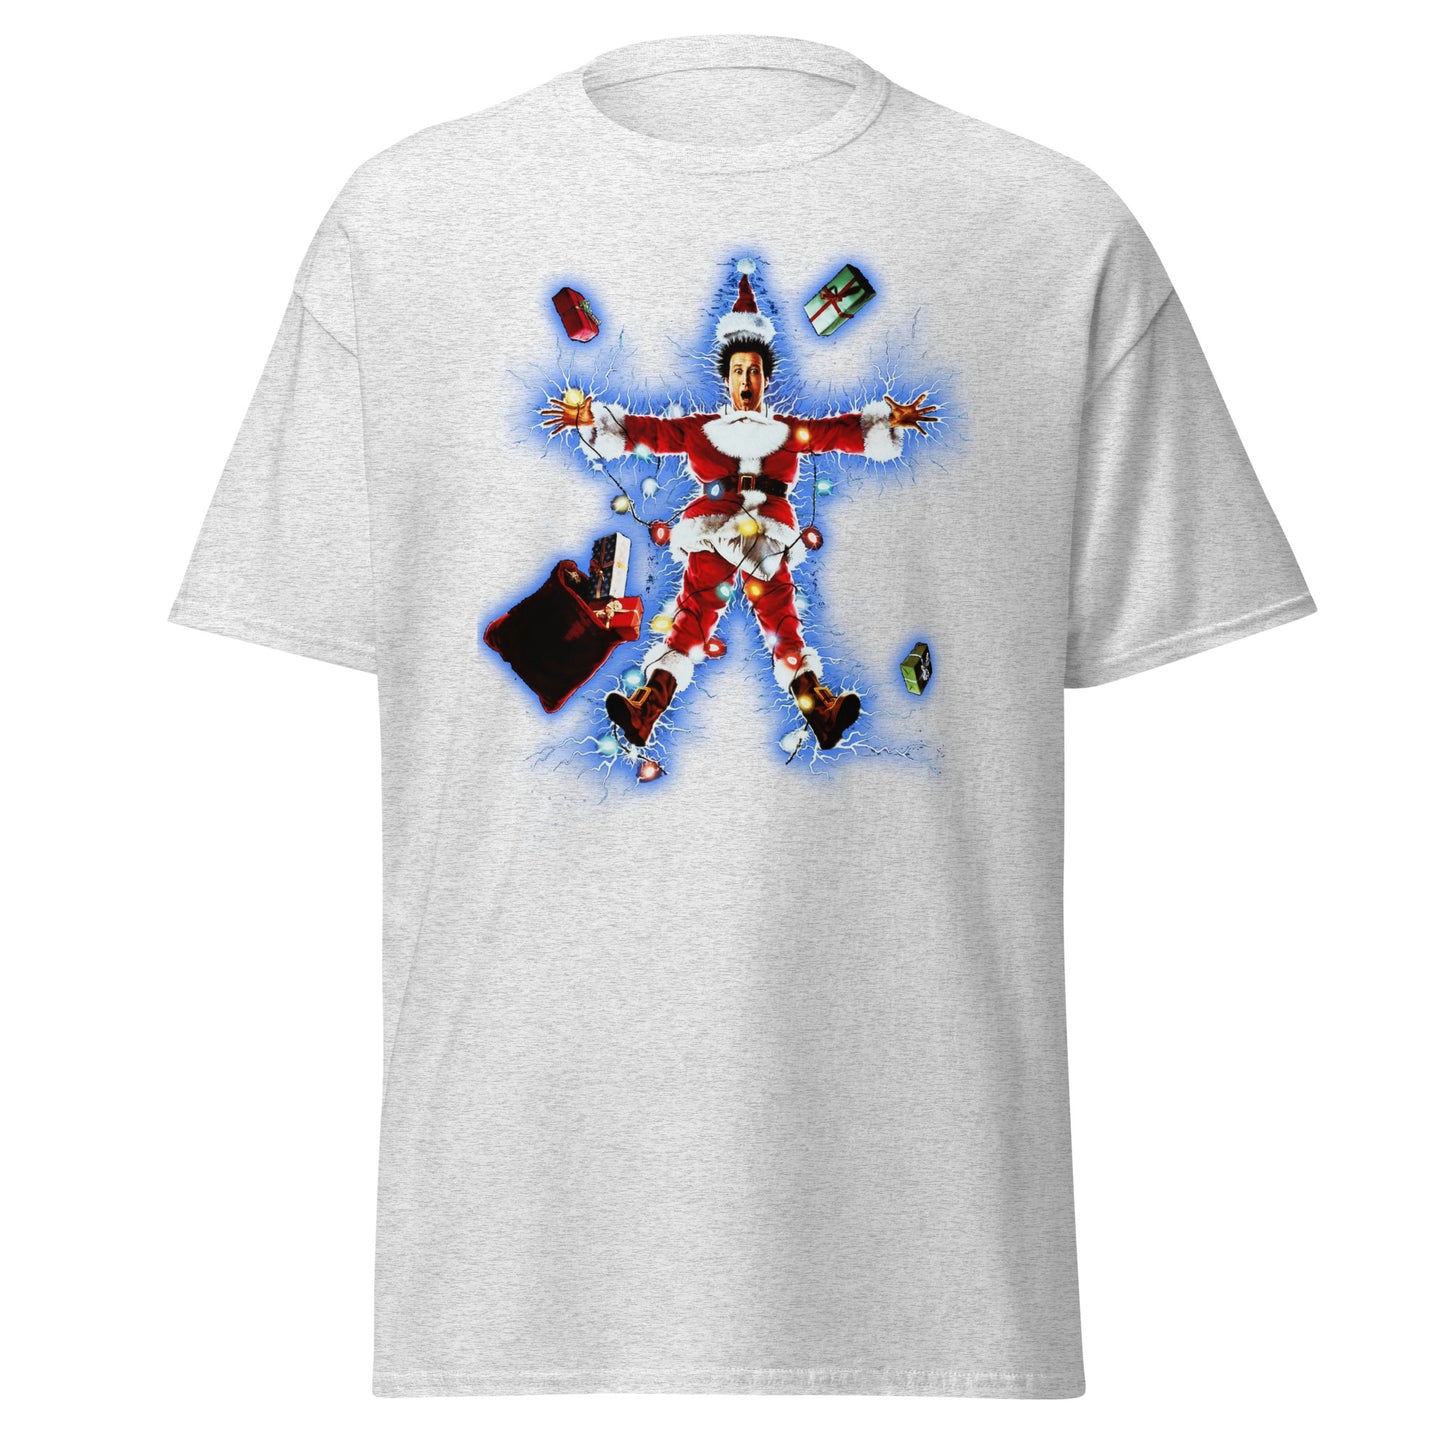 Christmas Vacation Clark Griswold T-Shirt - White